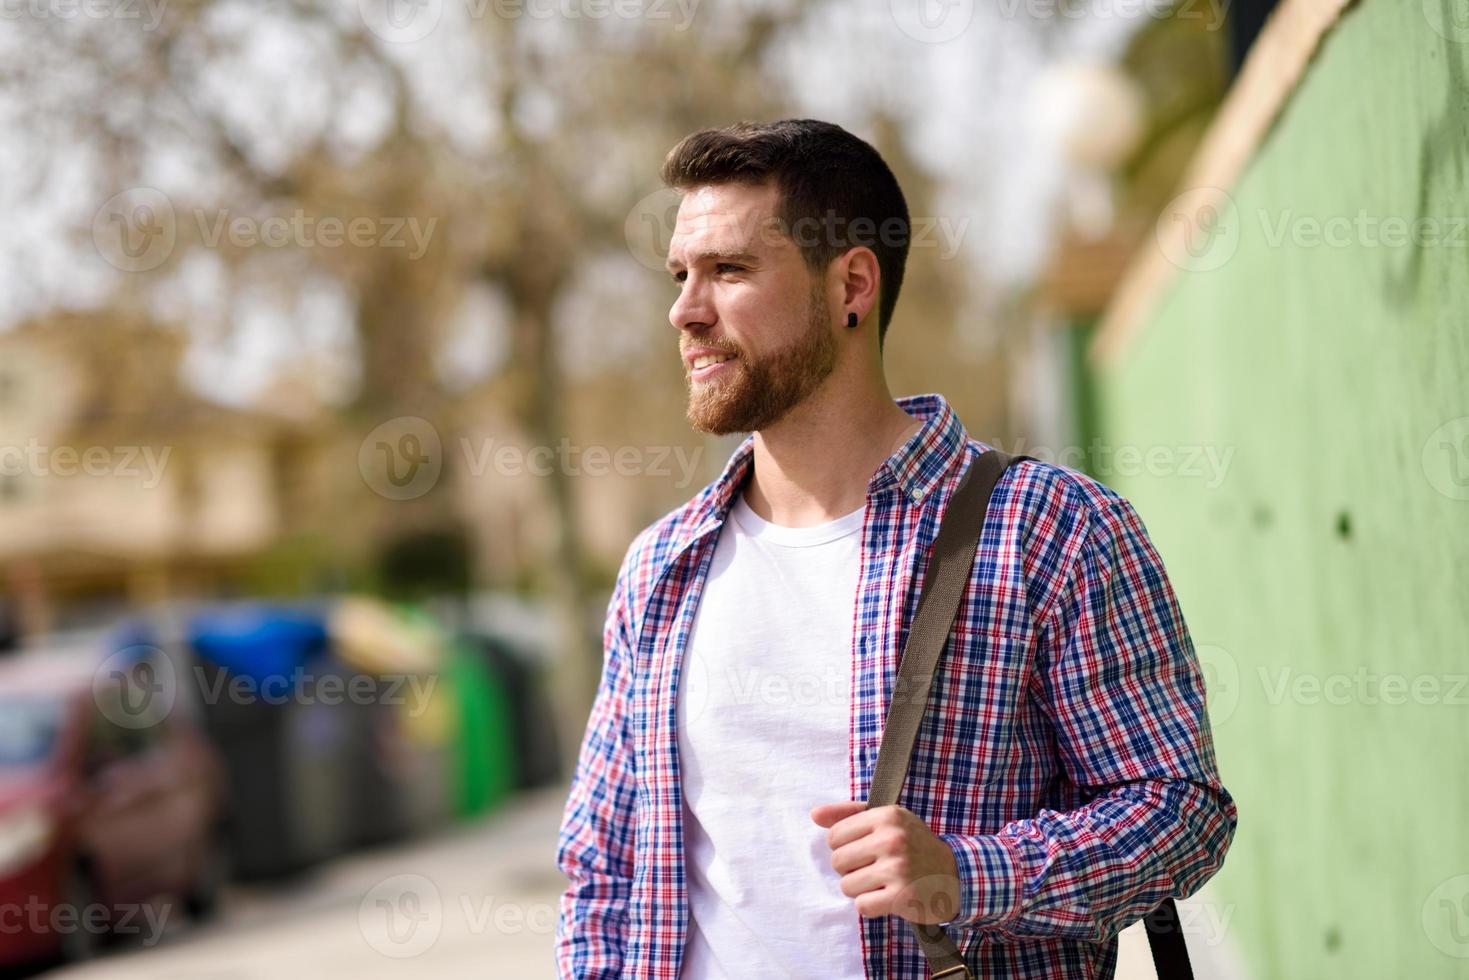 Attractive young man standing in urban background. Lifestyle concept. photo